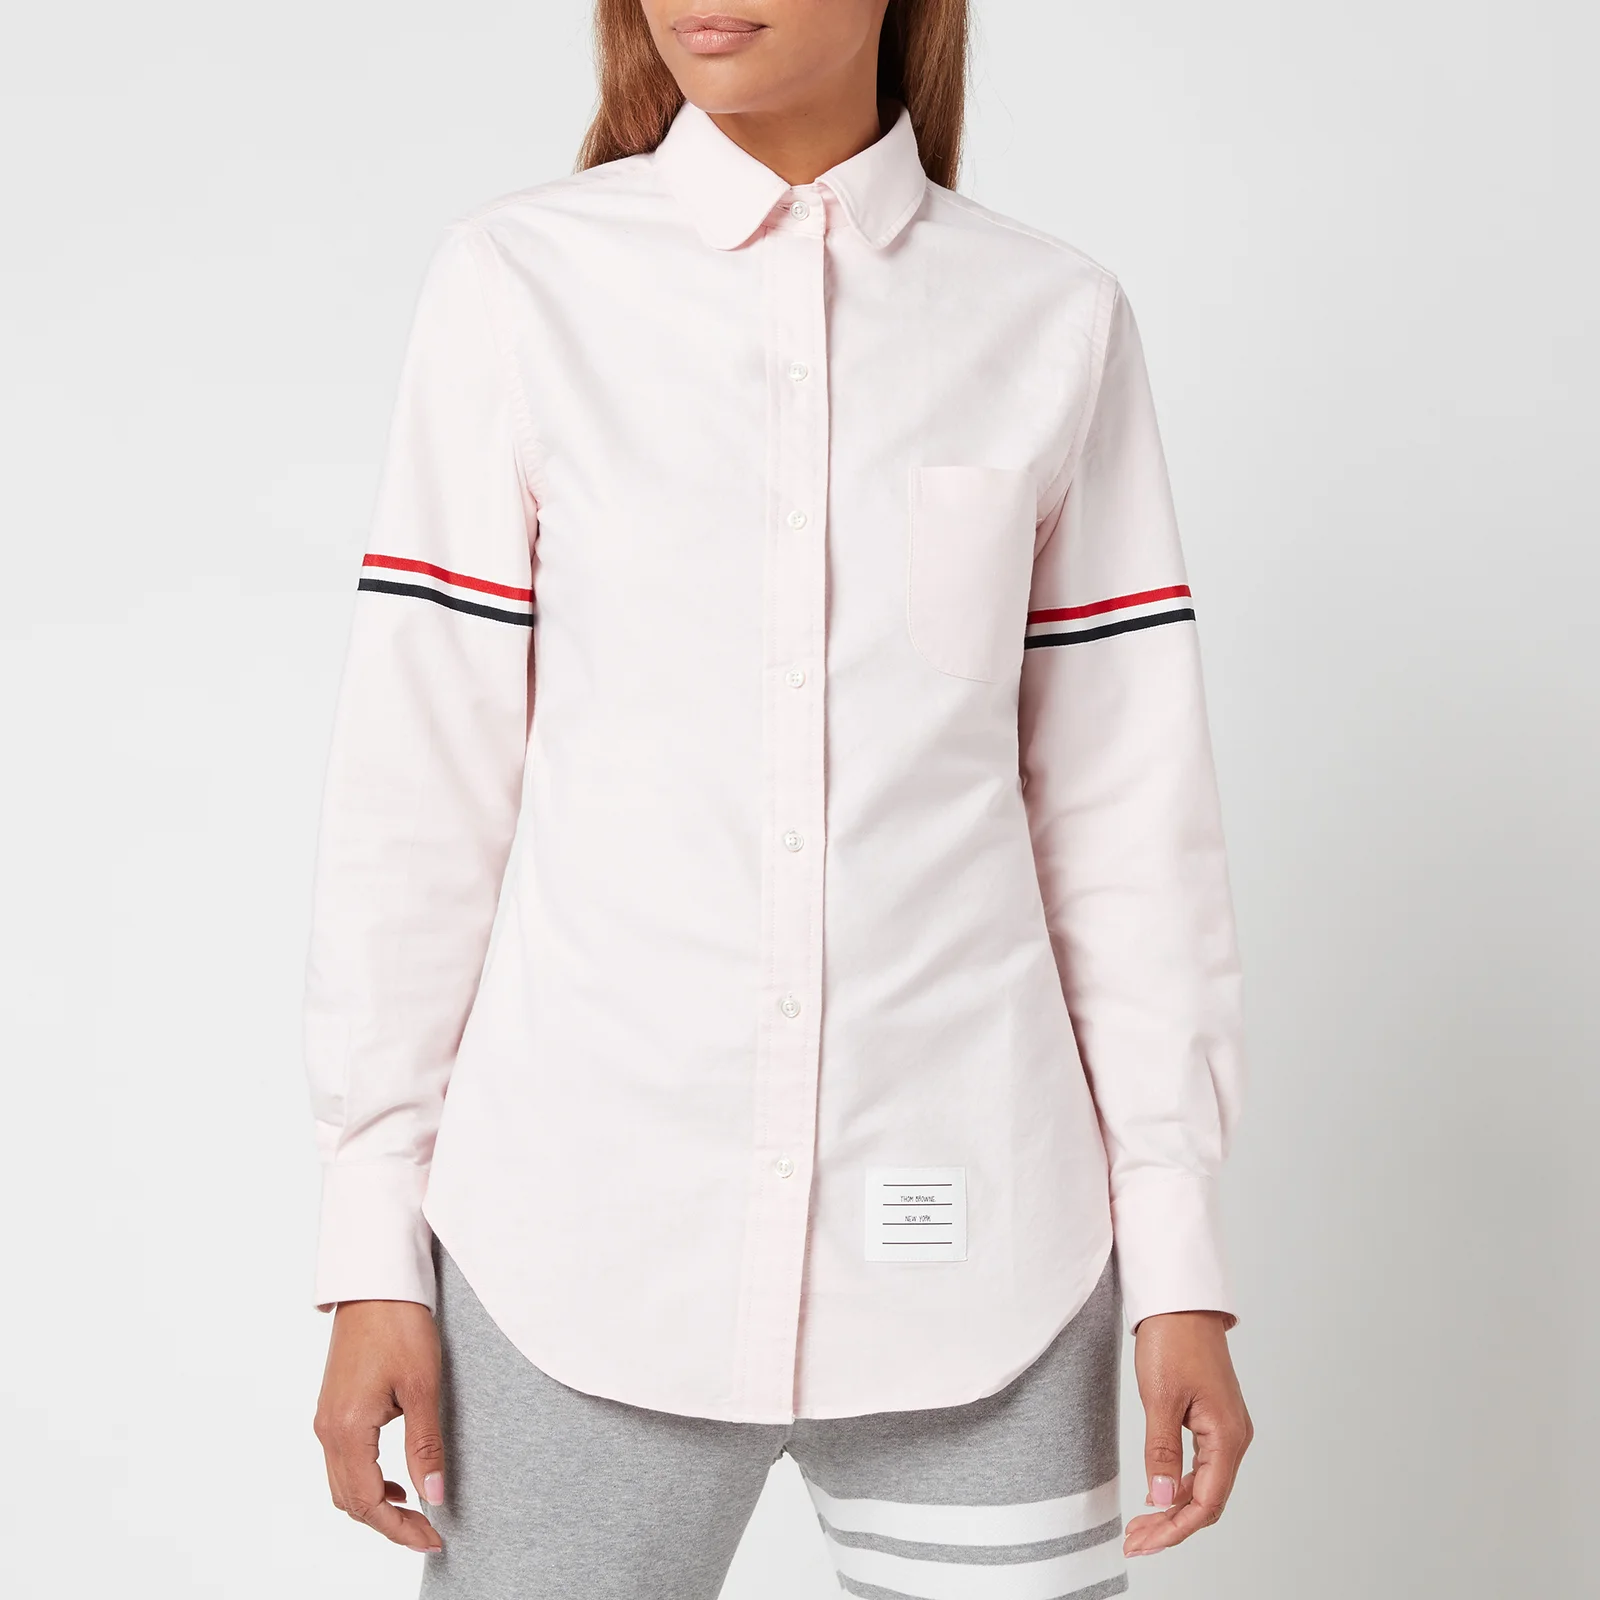 Thom Browne Women's Classic Long Sleeve Round Collar Shirt with Gg Armband - Light Pink Image 1